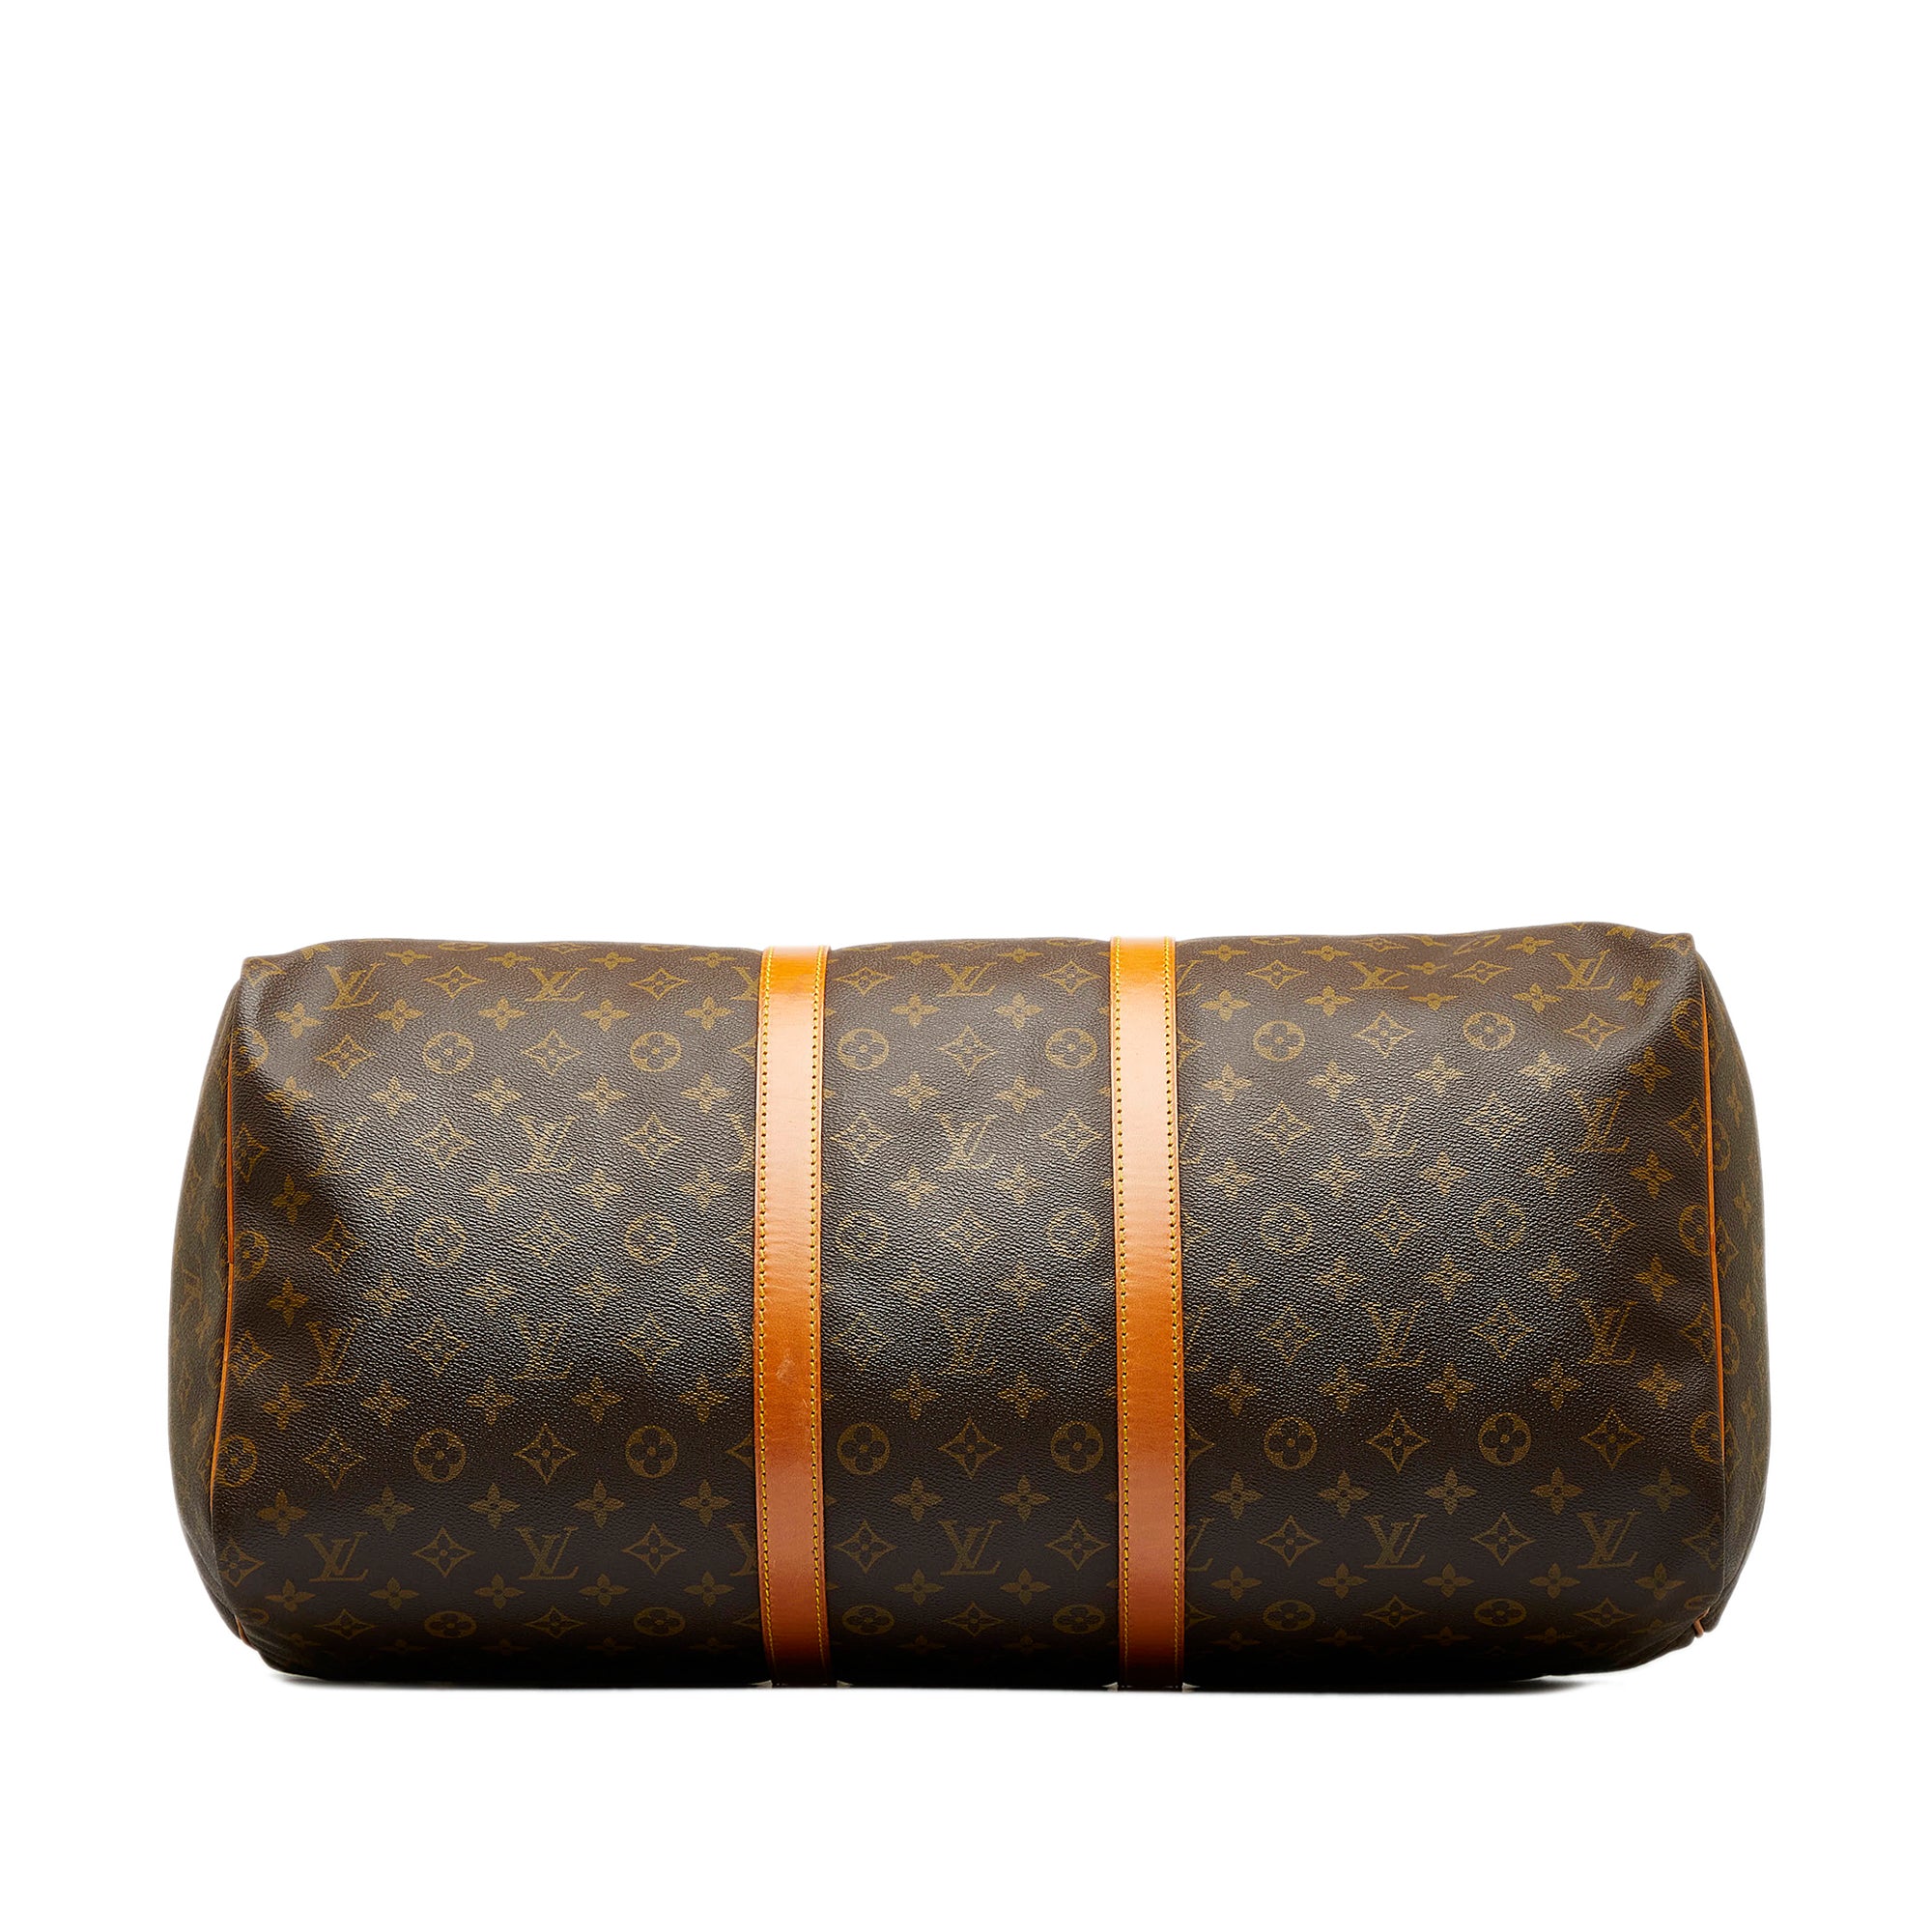 Louis Vuitton Monogram Keepall 55 - Brown Luggage and Travel